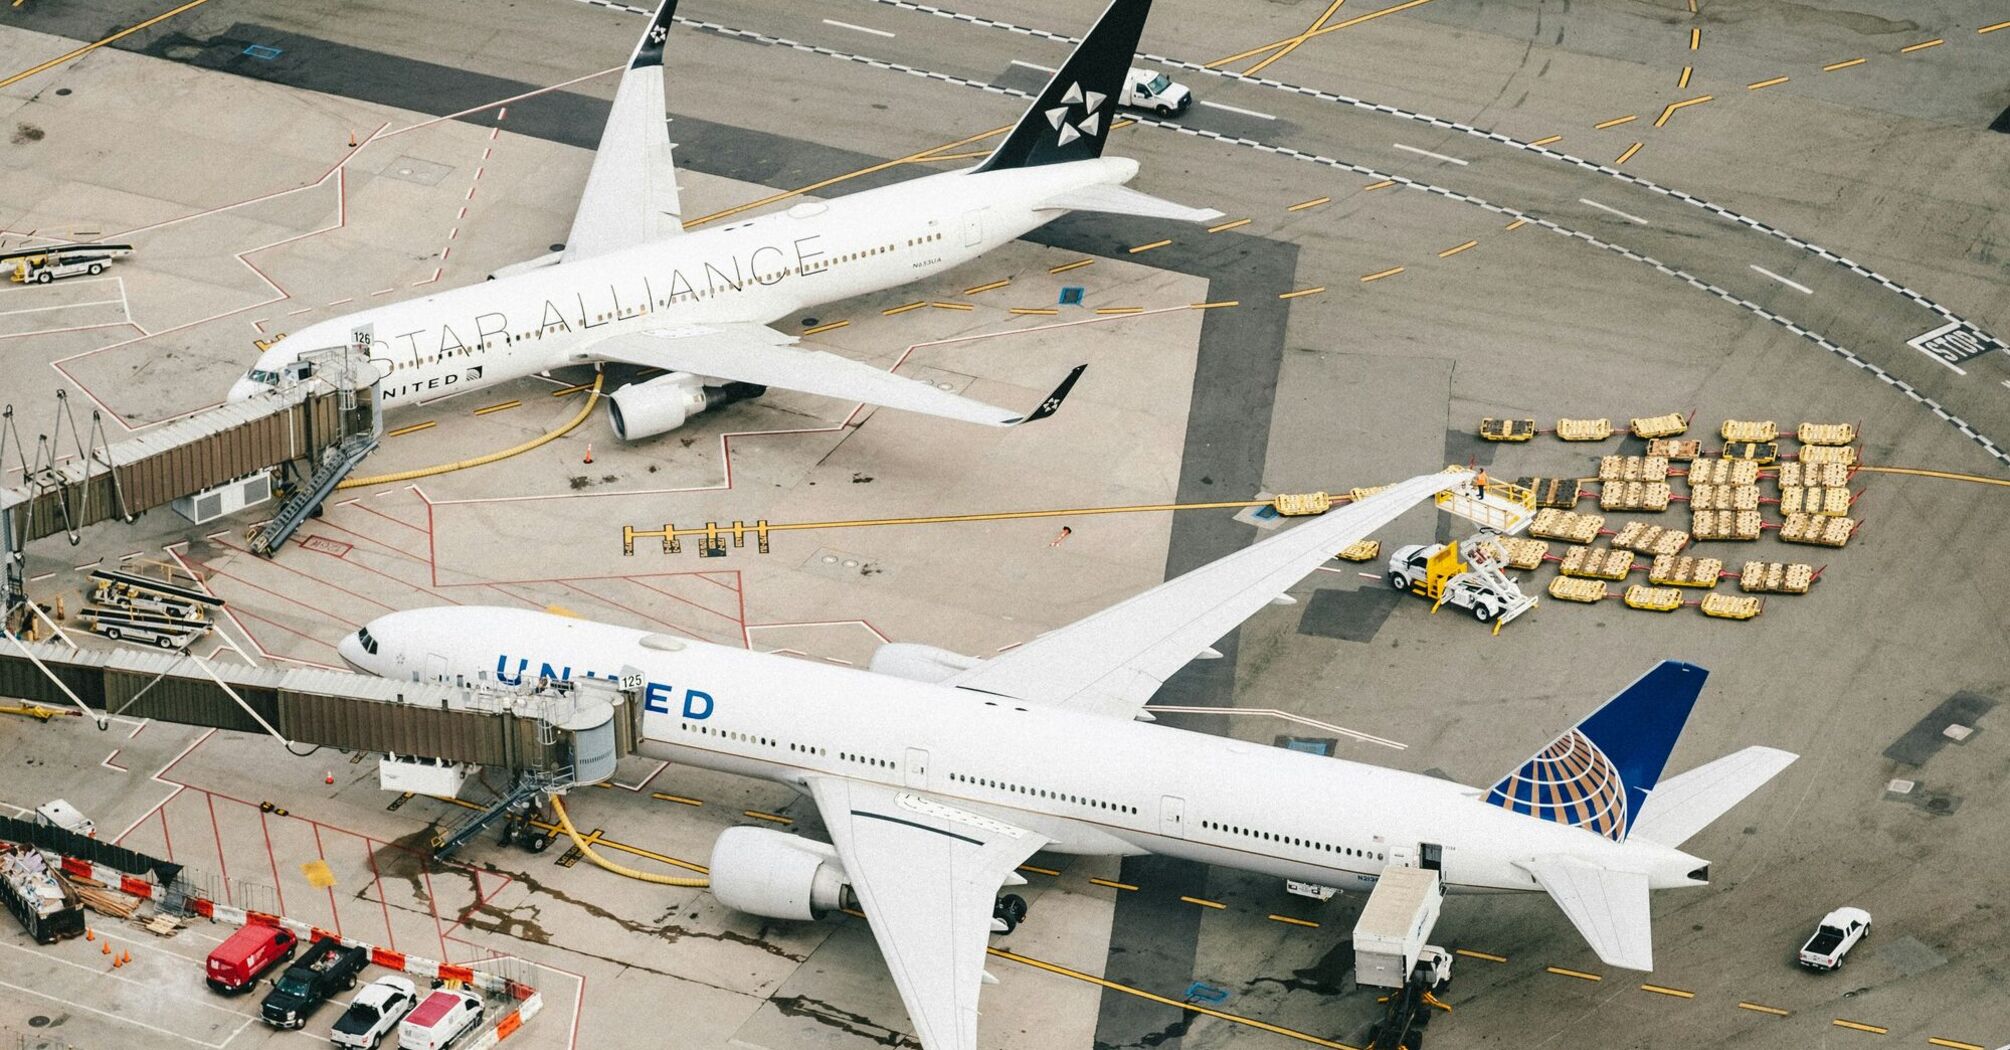 Two white airplanes on airport during daytime